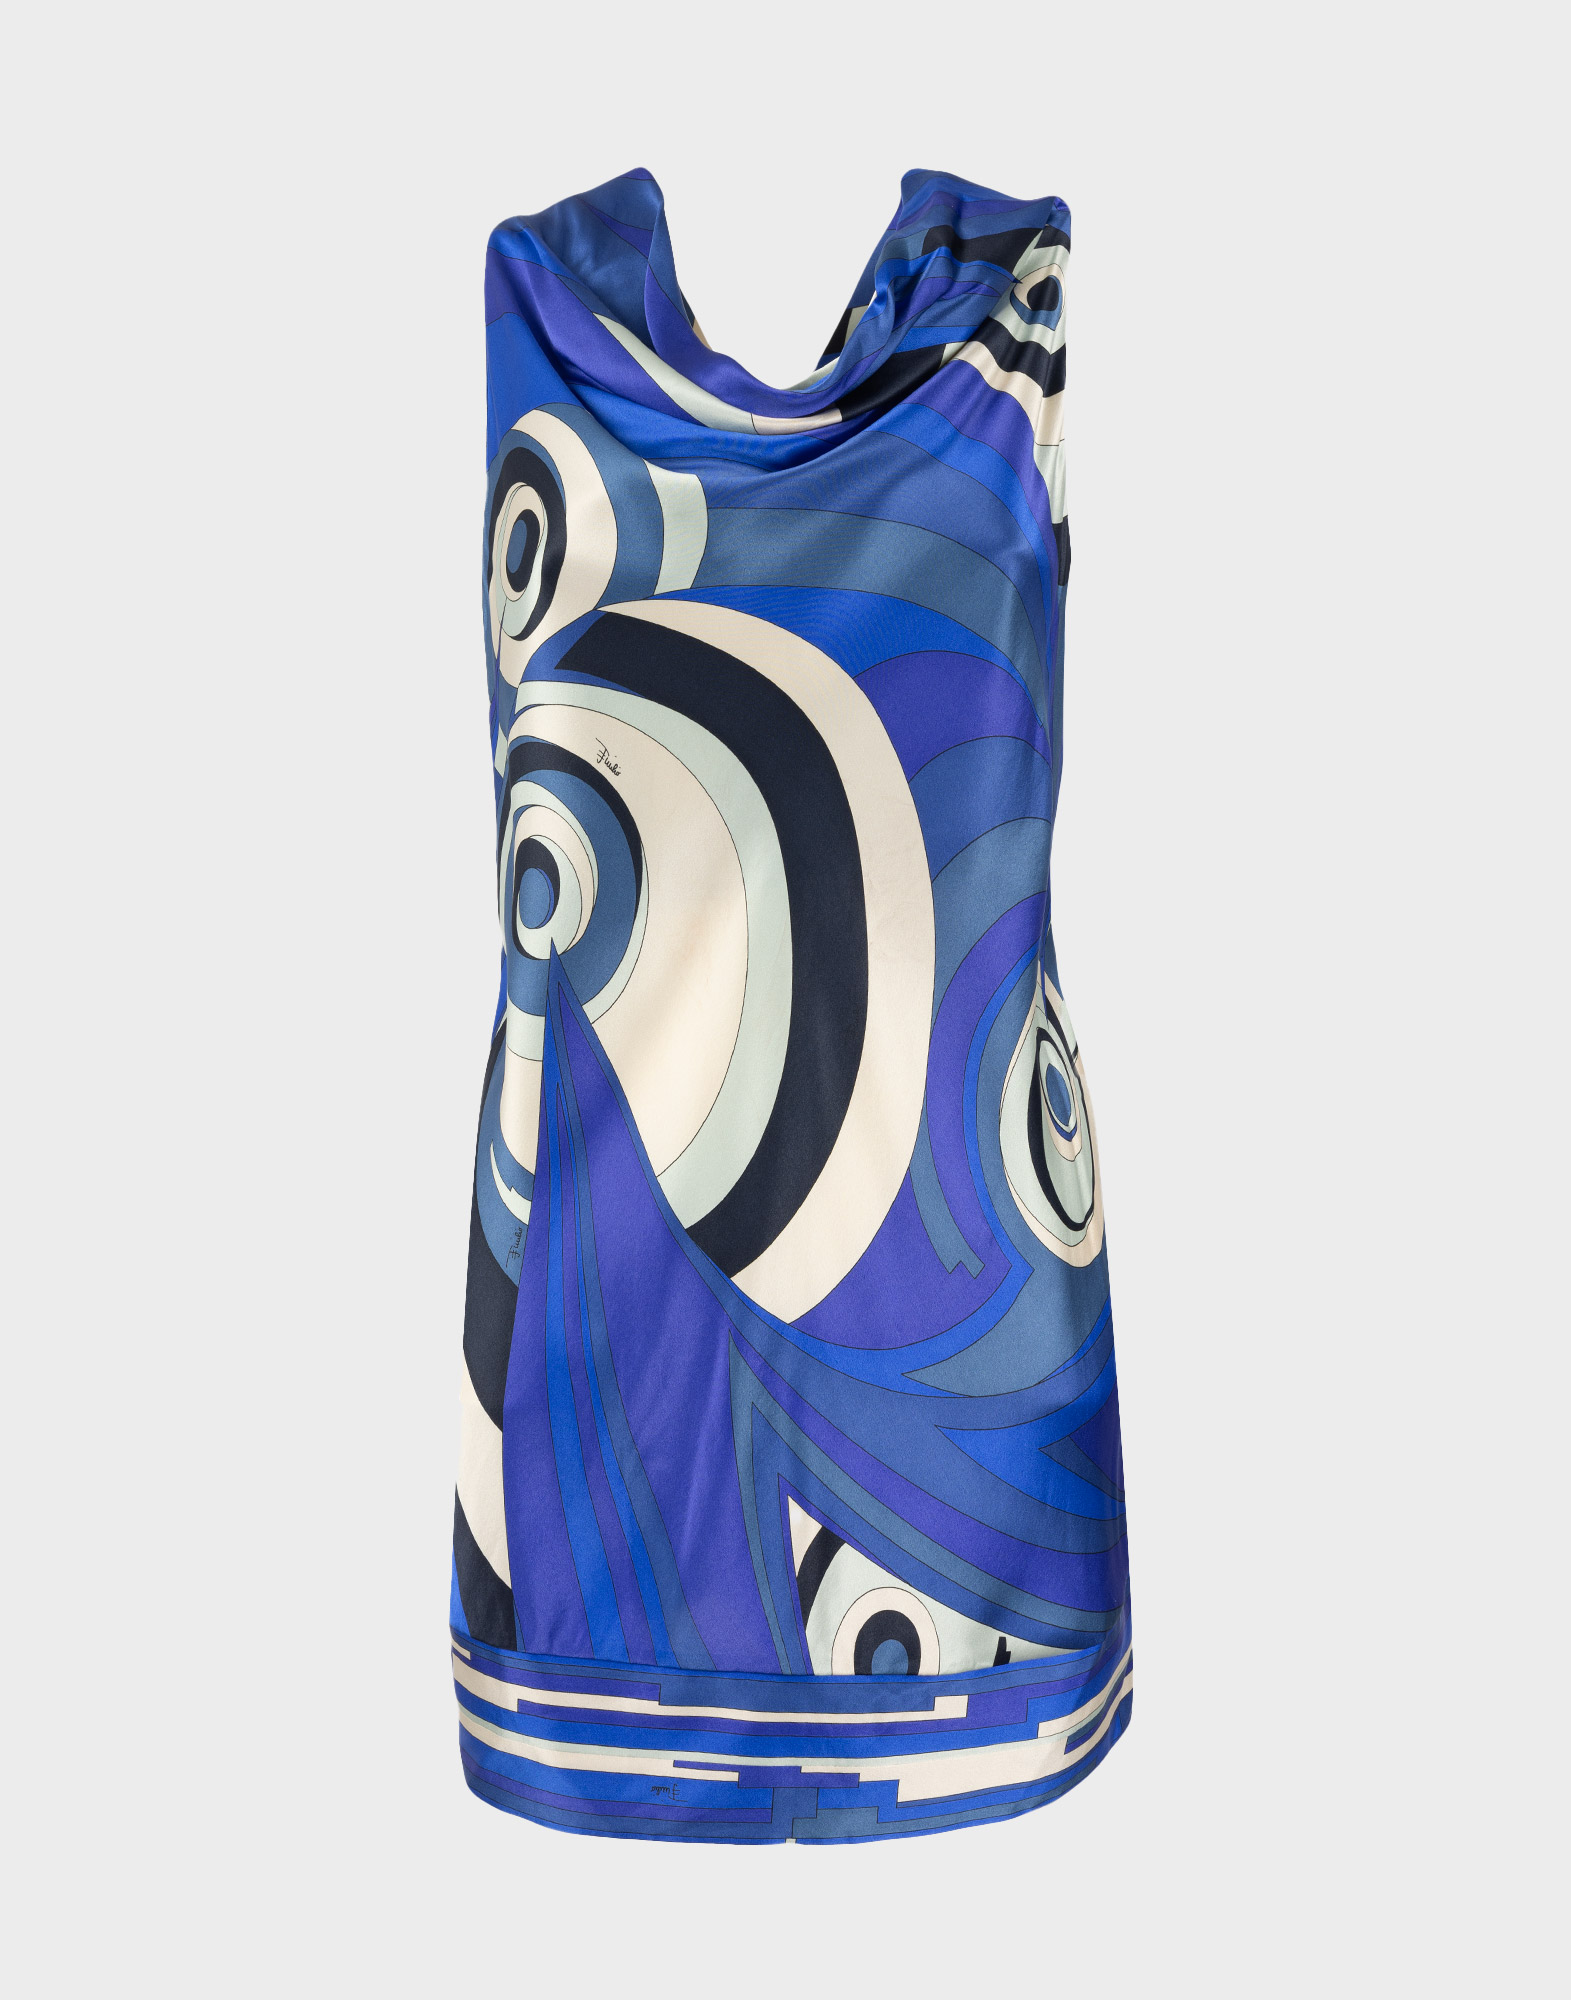 emilio pucci women's top in blue, white and black geometric pattern with shawl collar